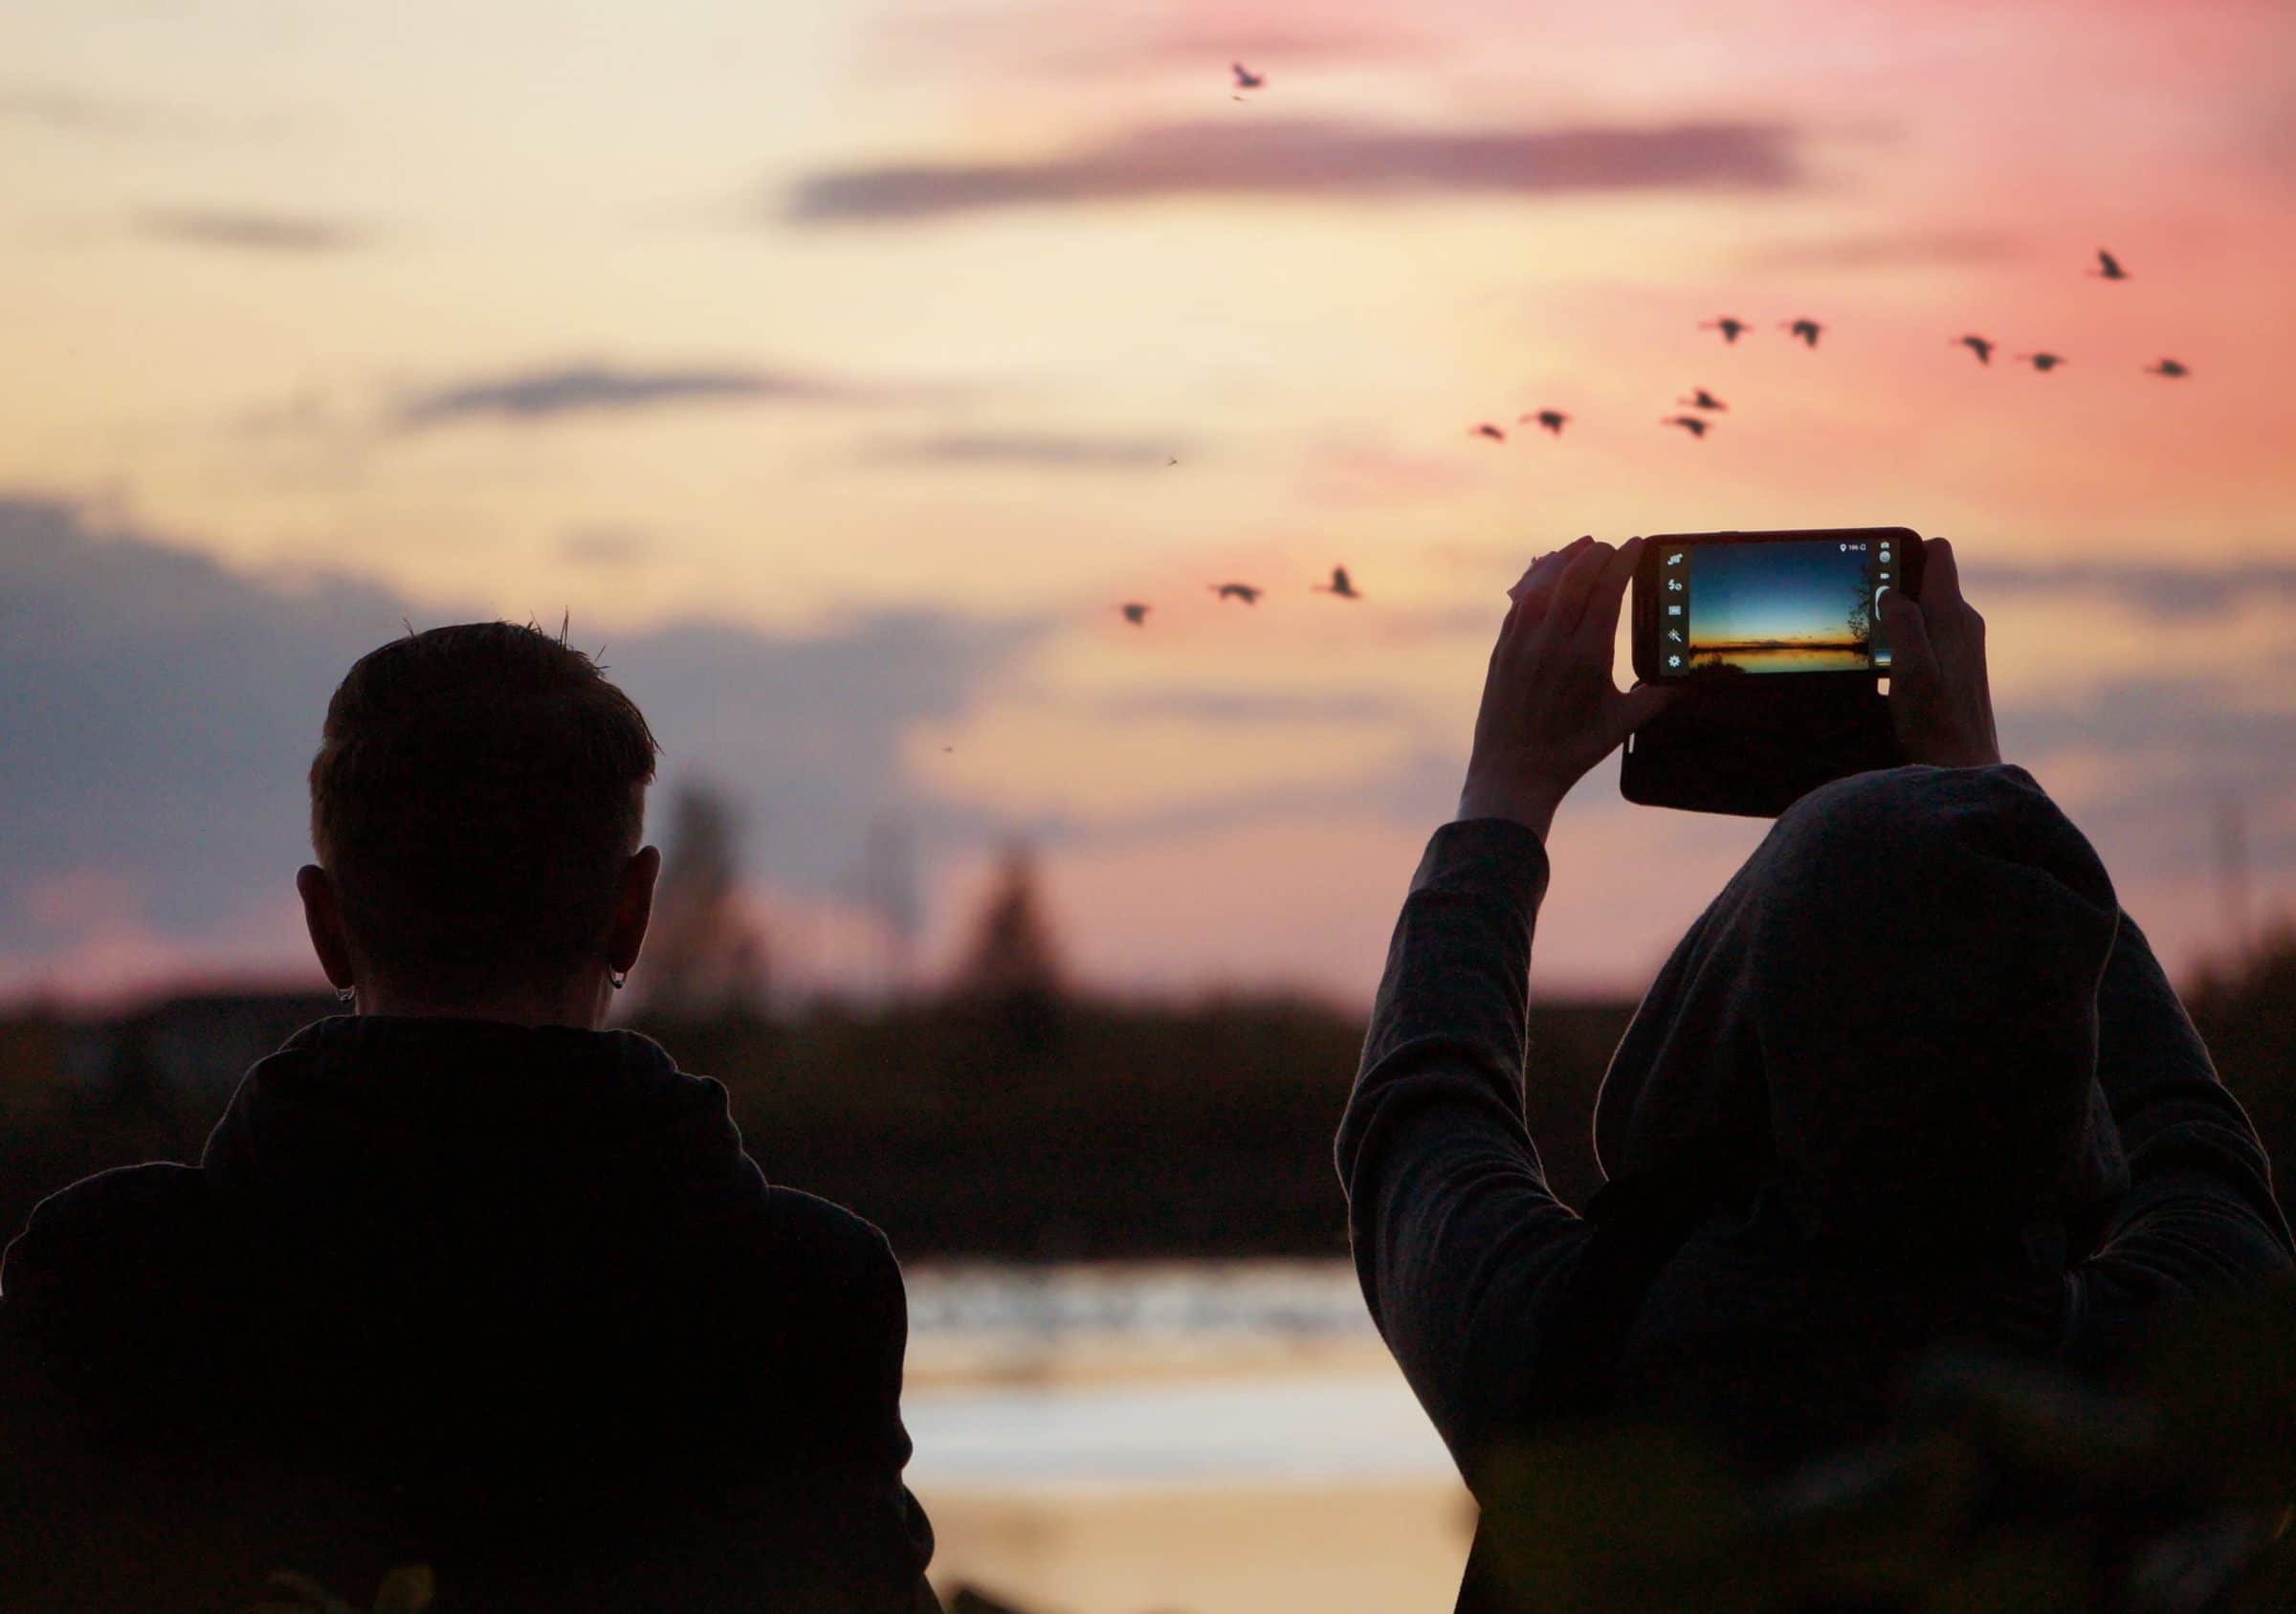 Two people watching migration at sunset